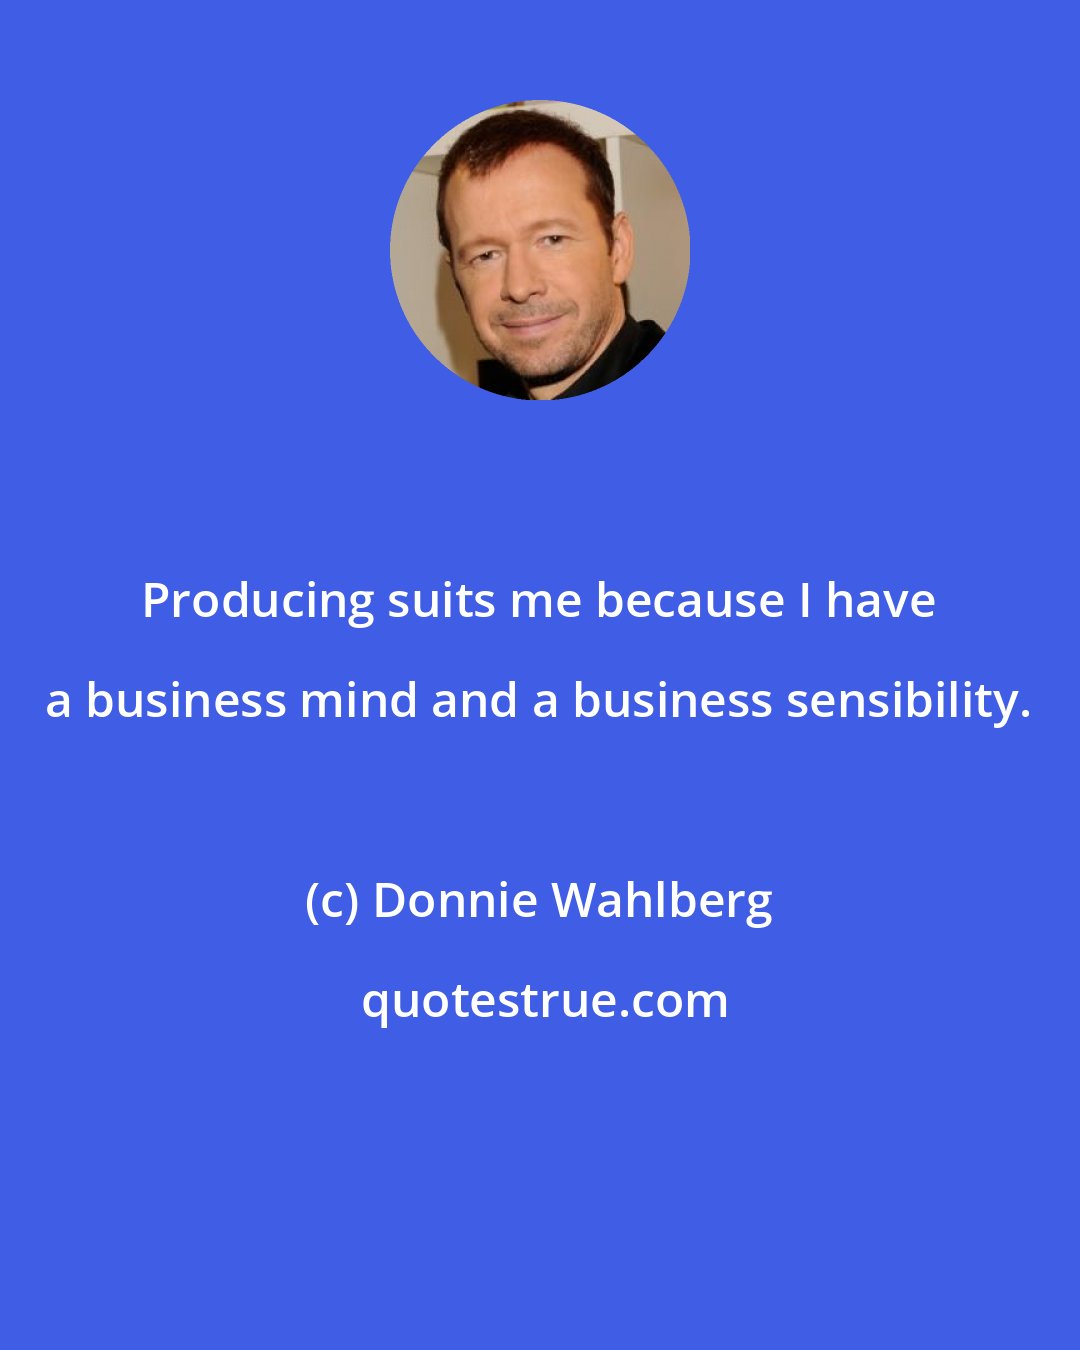 Donnie Wahlberg: Producing suits me because I have a business mind and a business sensibility.